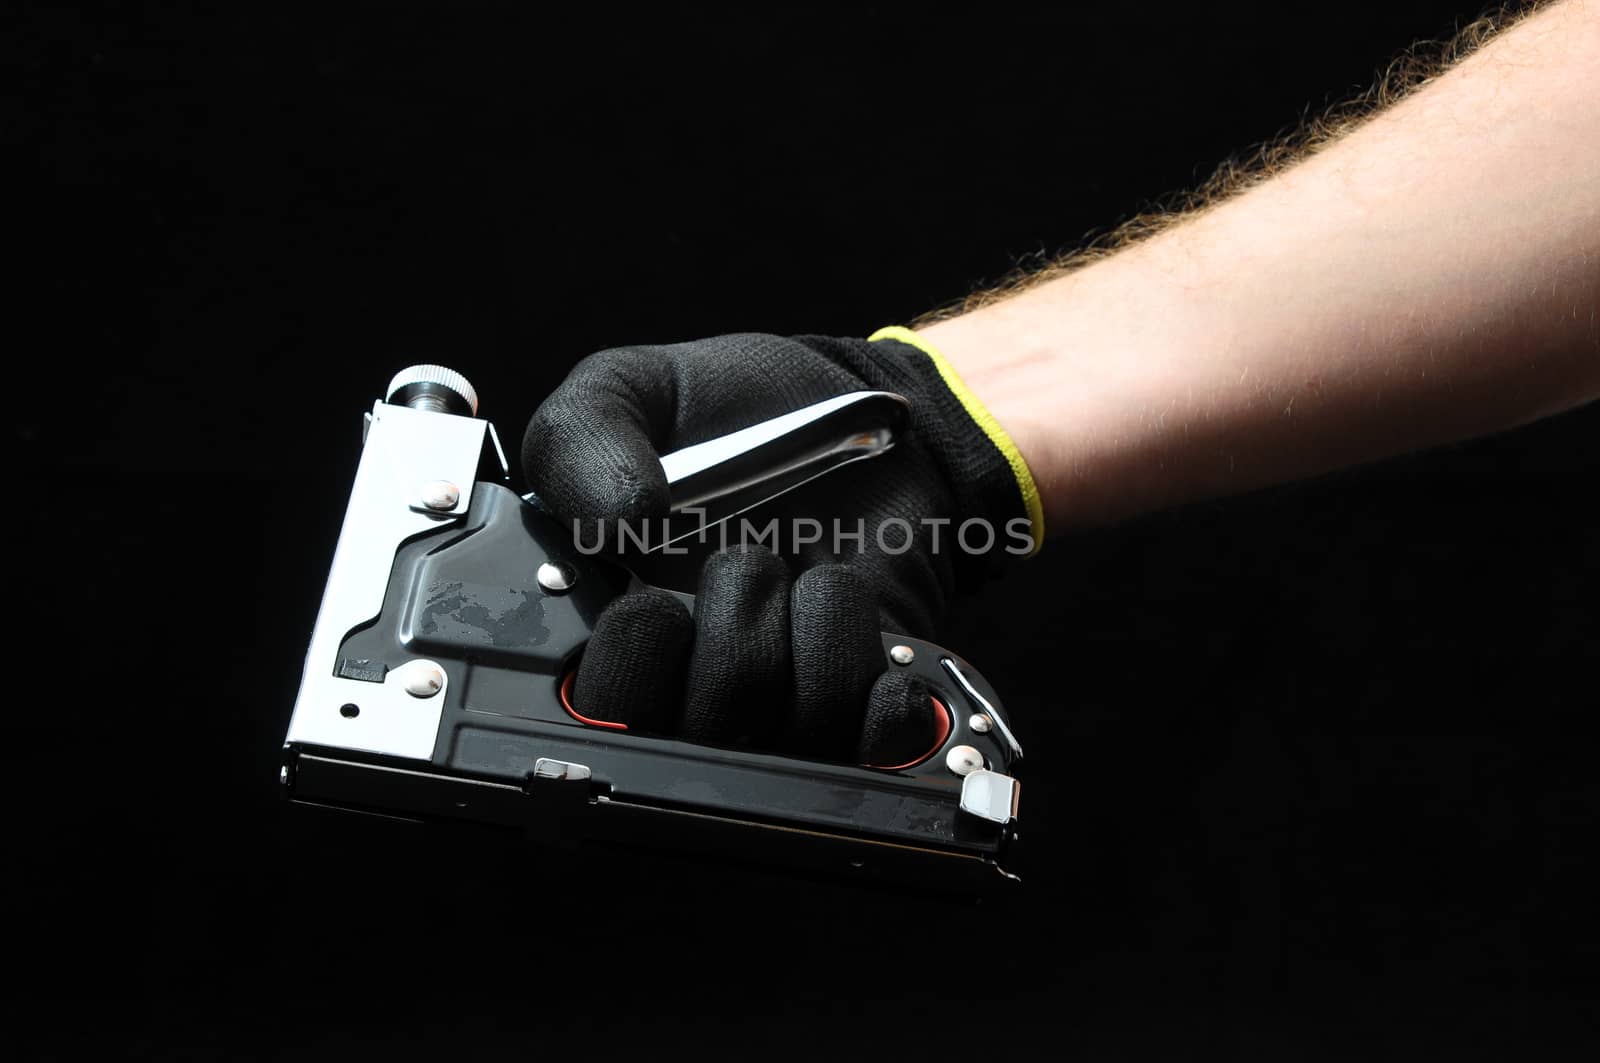 Stapler Pliers and a Hand on a Black Background